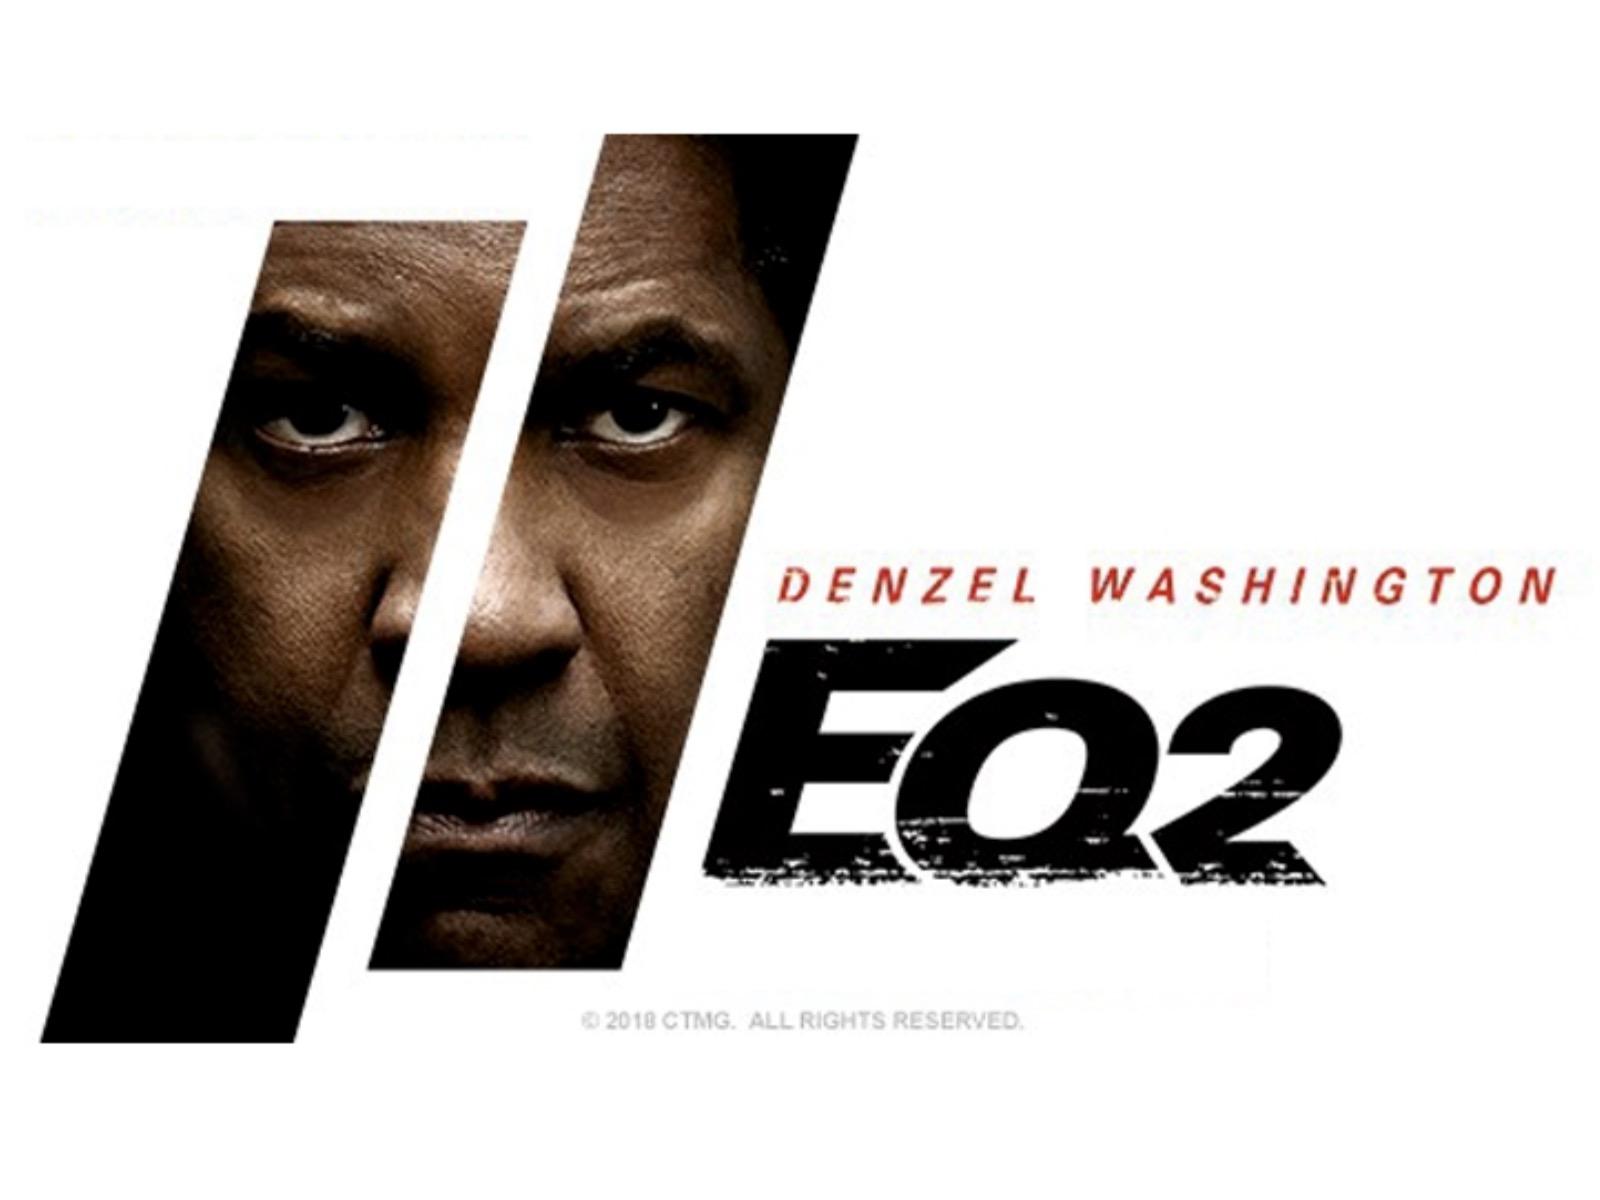 The Equalizer 2: Denzel Washington's Best Action Packed Movies